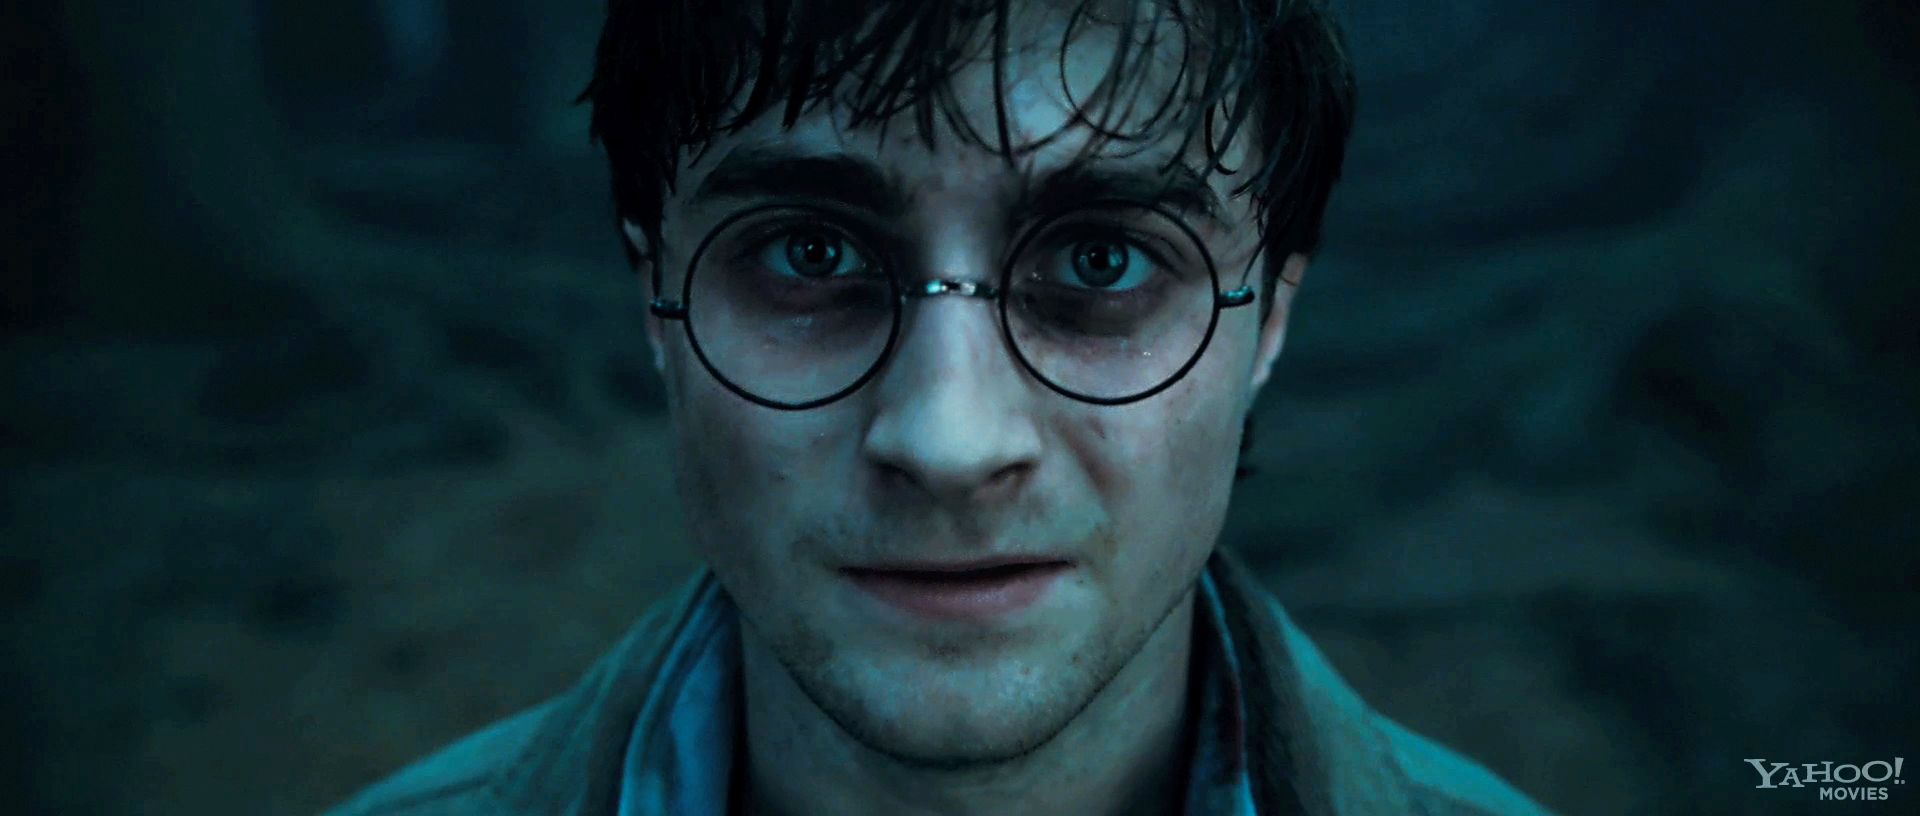 Harry Potter and the Deathly Hallow Trailer Still #5